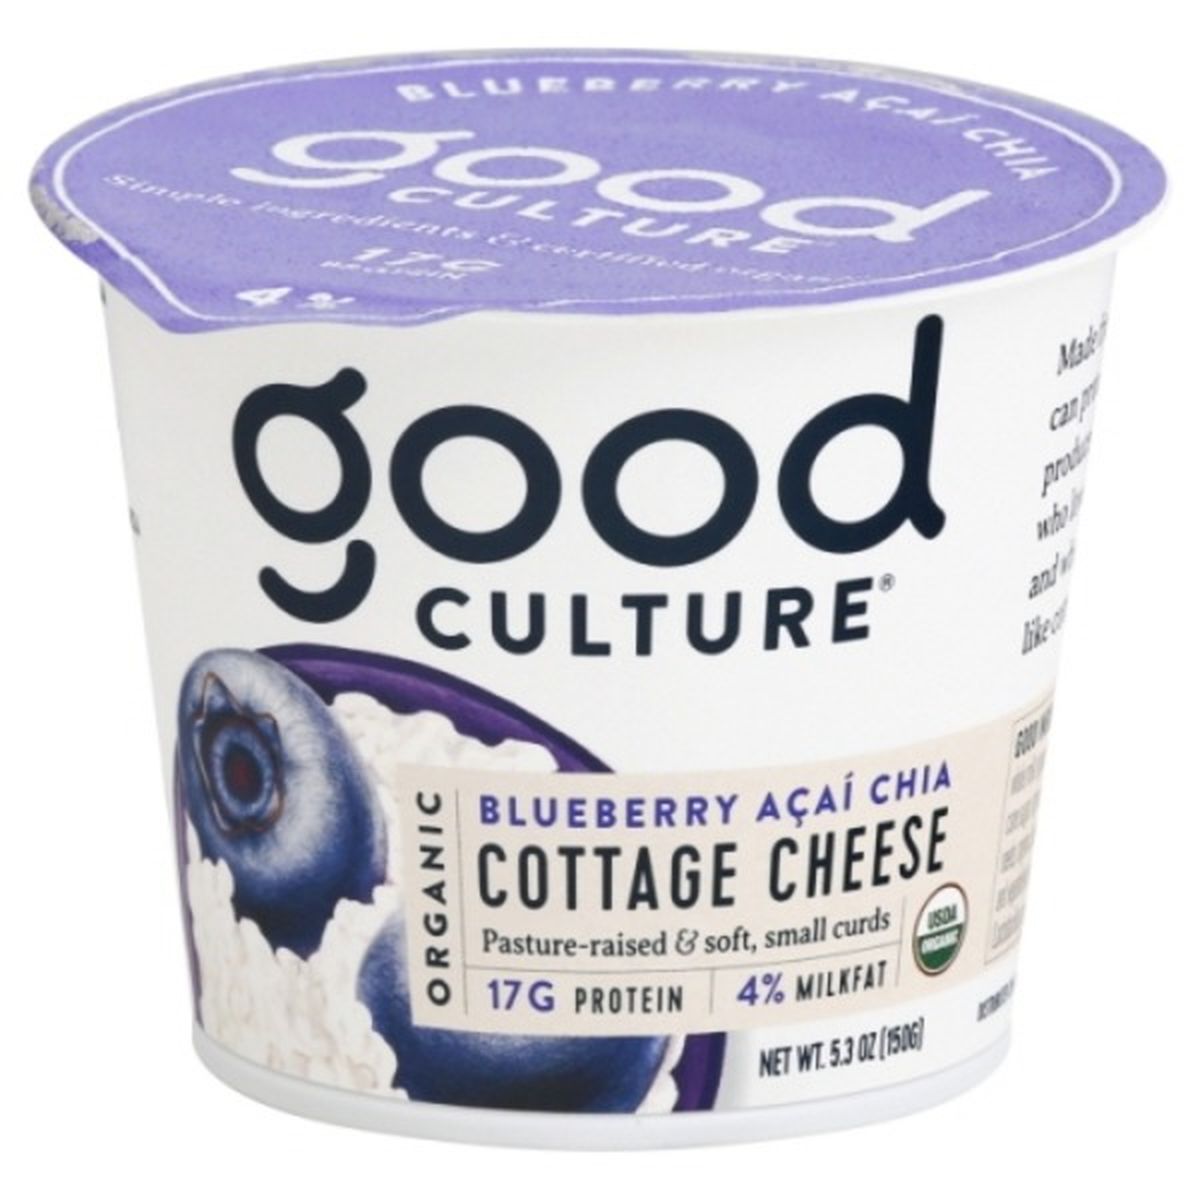 Calories in Good Culture Cottage Cheese, Organic, Blueberry Acai Chia